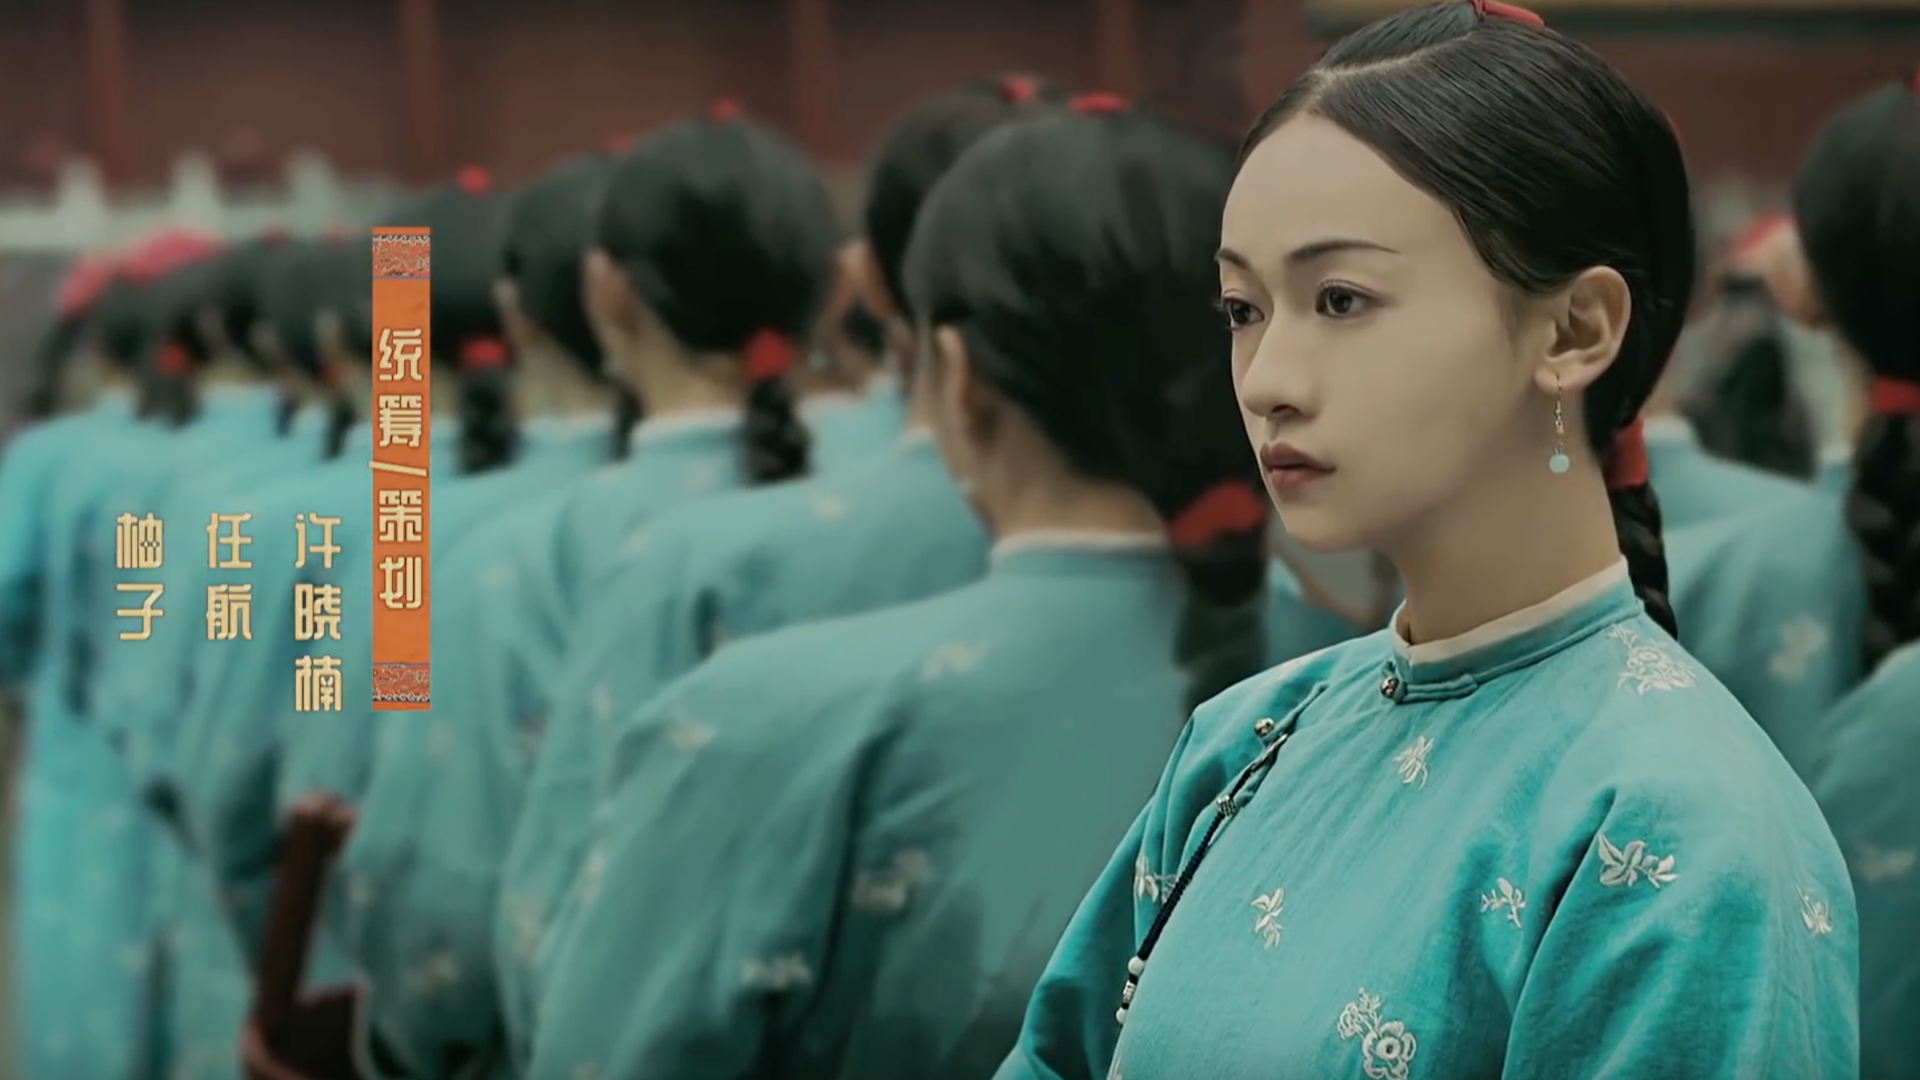 China's hottest show is an imperial concubine drama - Axios